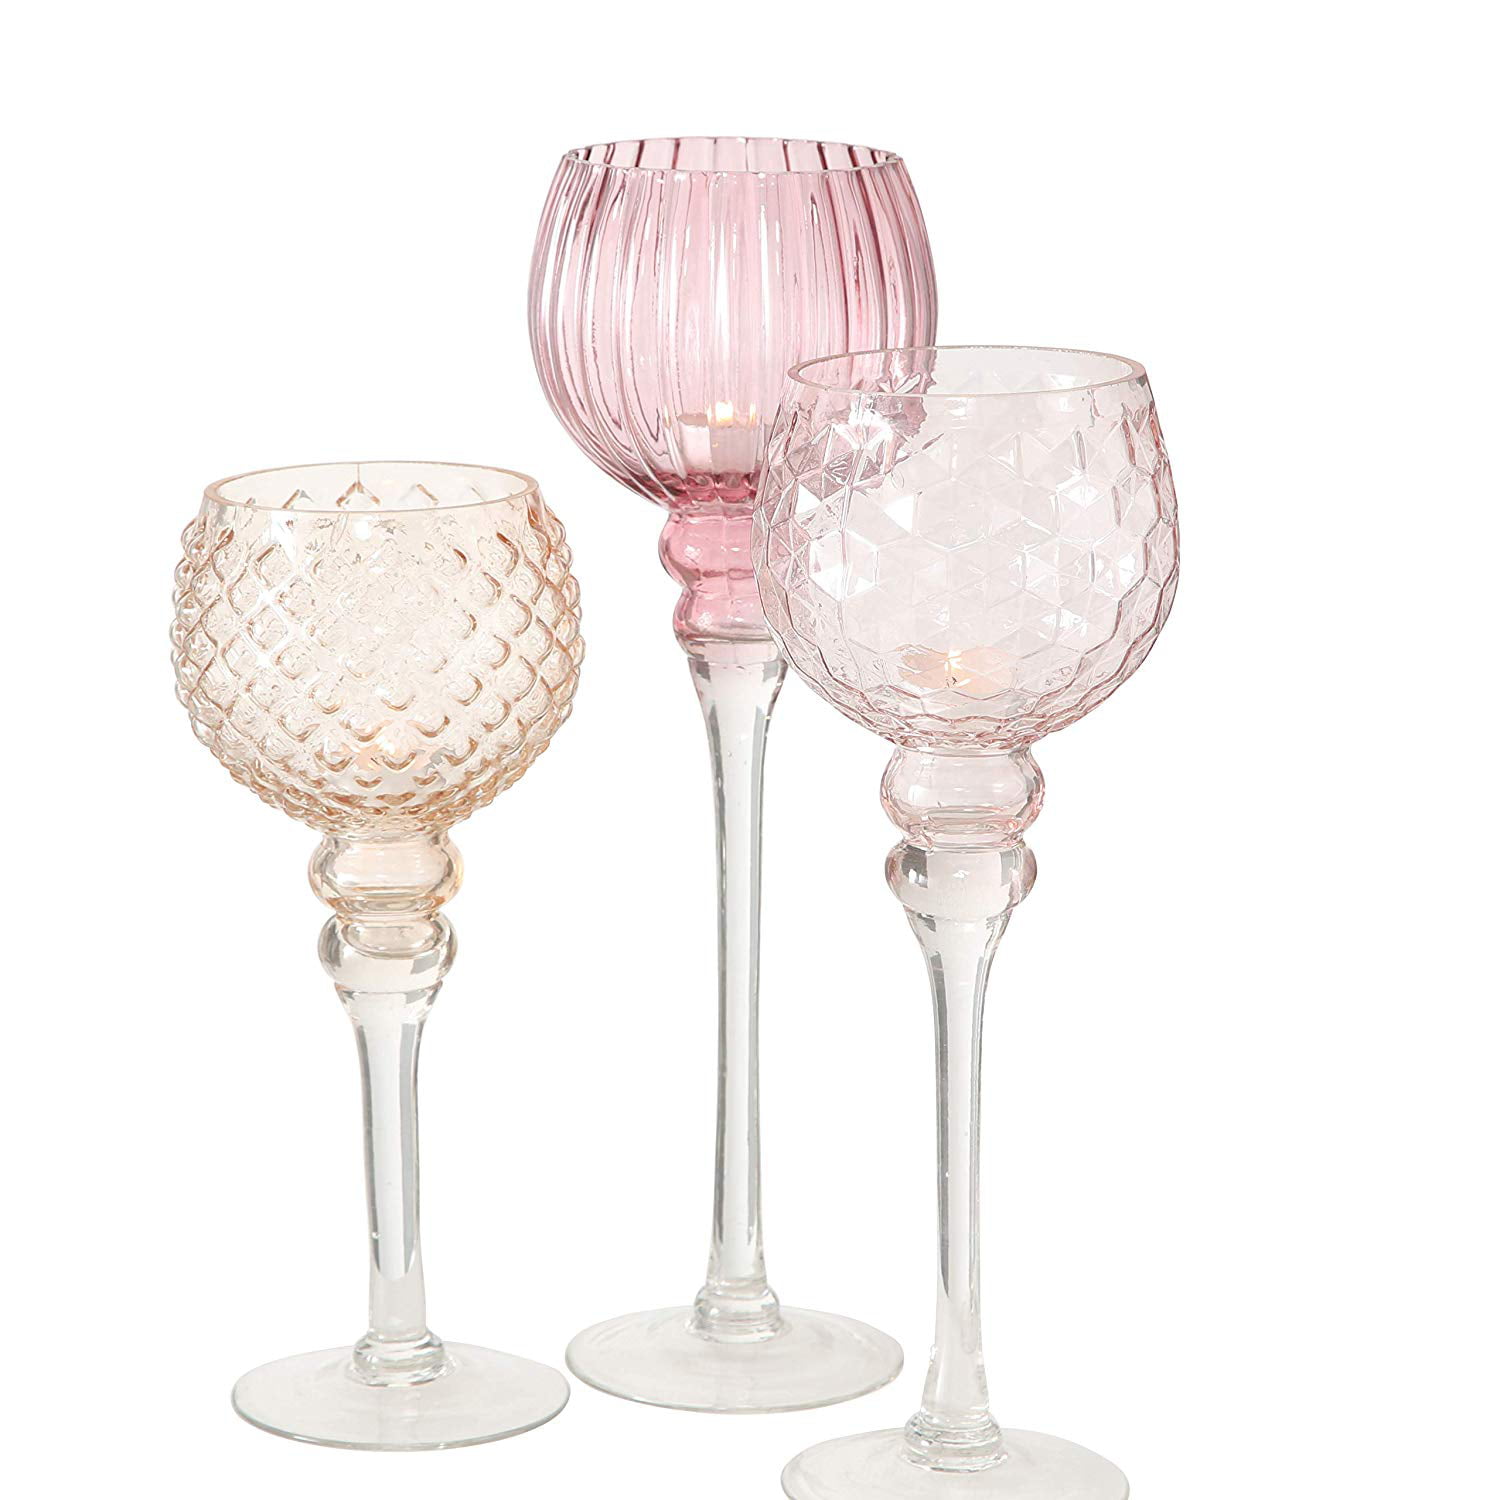 3 Large Wine Glass Cup Candle Holder Home Decor Decorative Glasses Cups